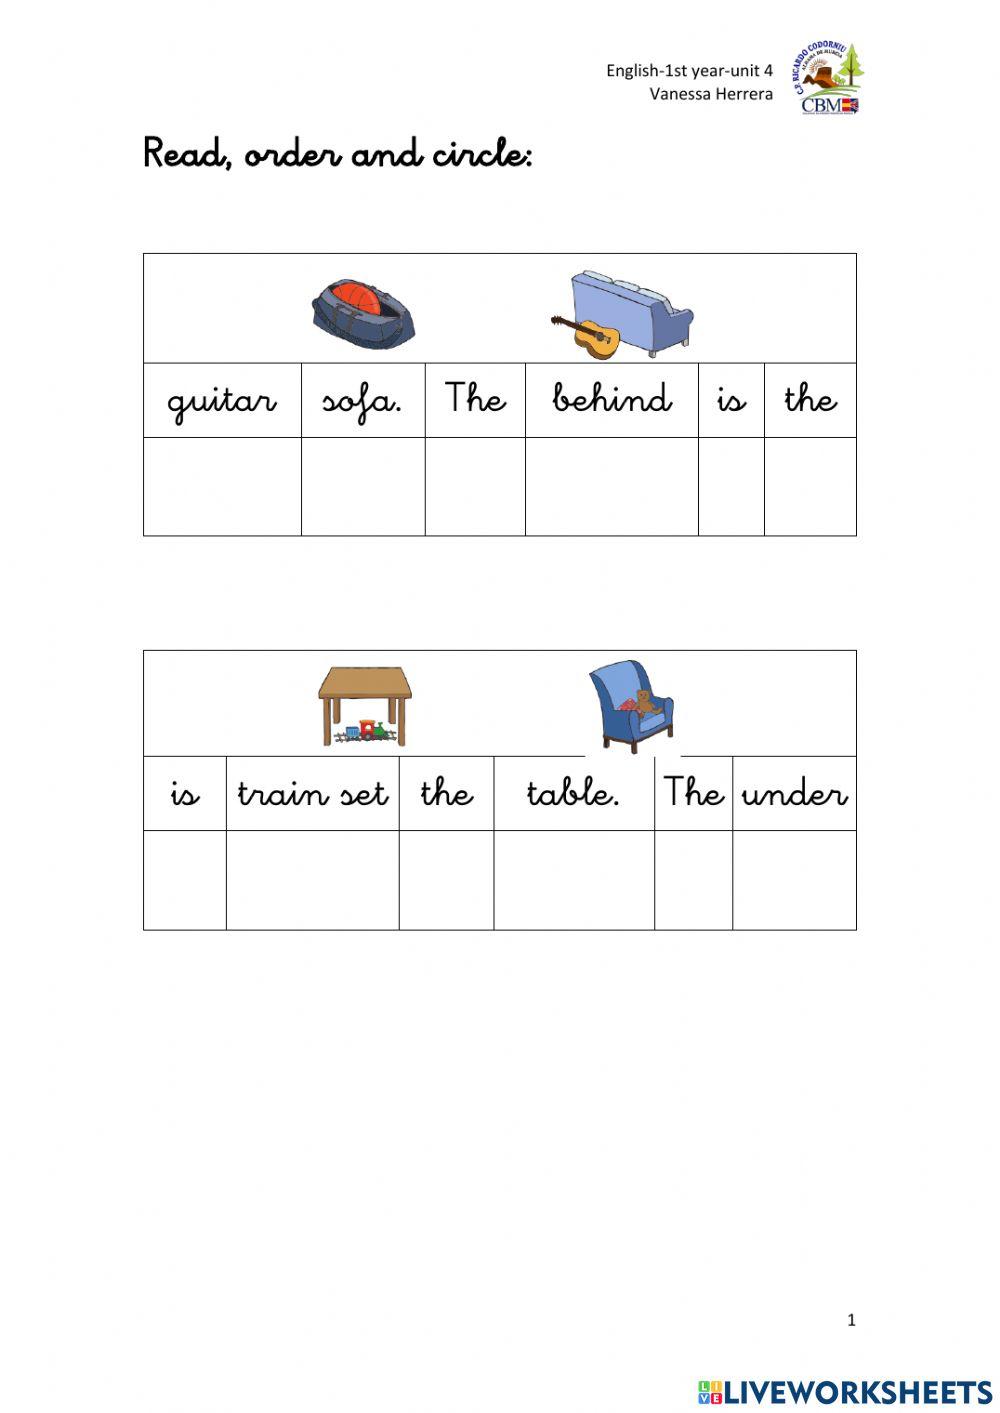 Read, order and circle. Prepositions of place and toys.